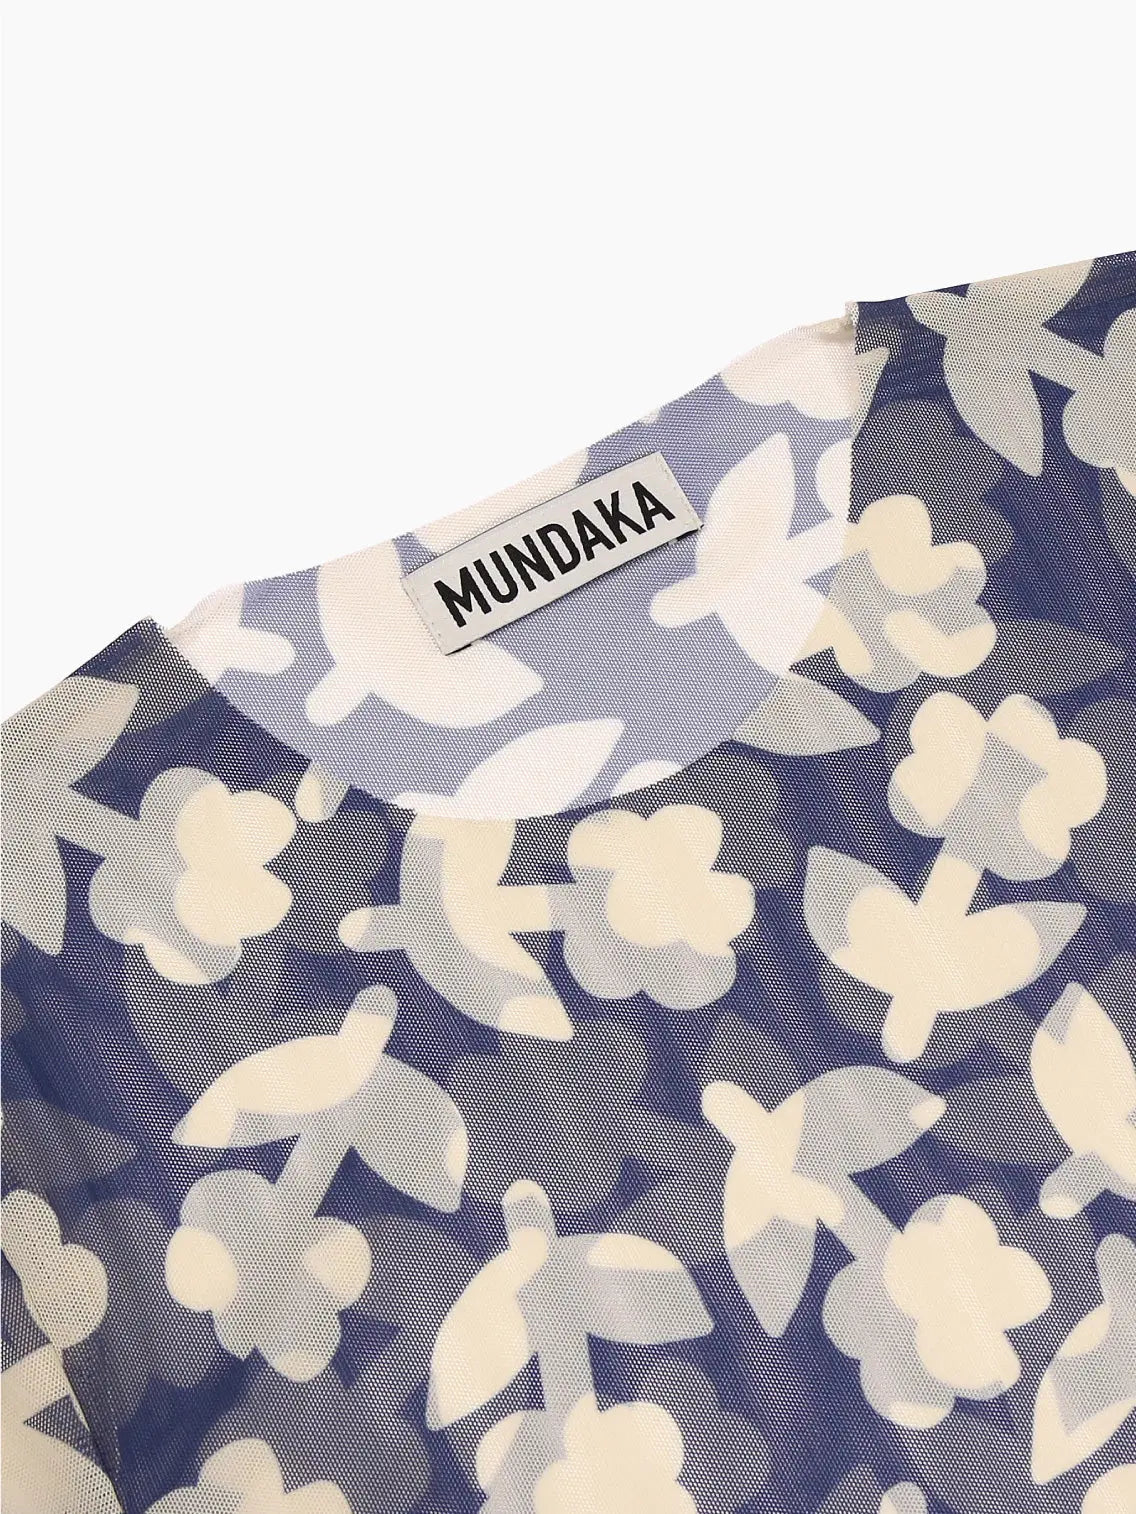 A Recycled Tulle T-Shirt Blue with a blue and white floral pattern. The flowers are abstract in design, and the shirt's fabric appears lightweight and semi-transparent. Perfect for a breezy day in Barcelona, this stylish piece from Mundaka is now available at Bassalstore.